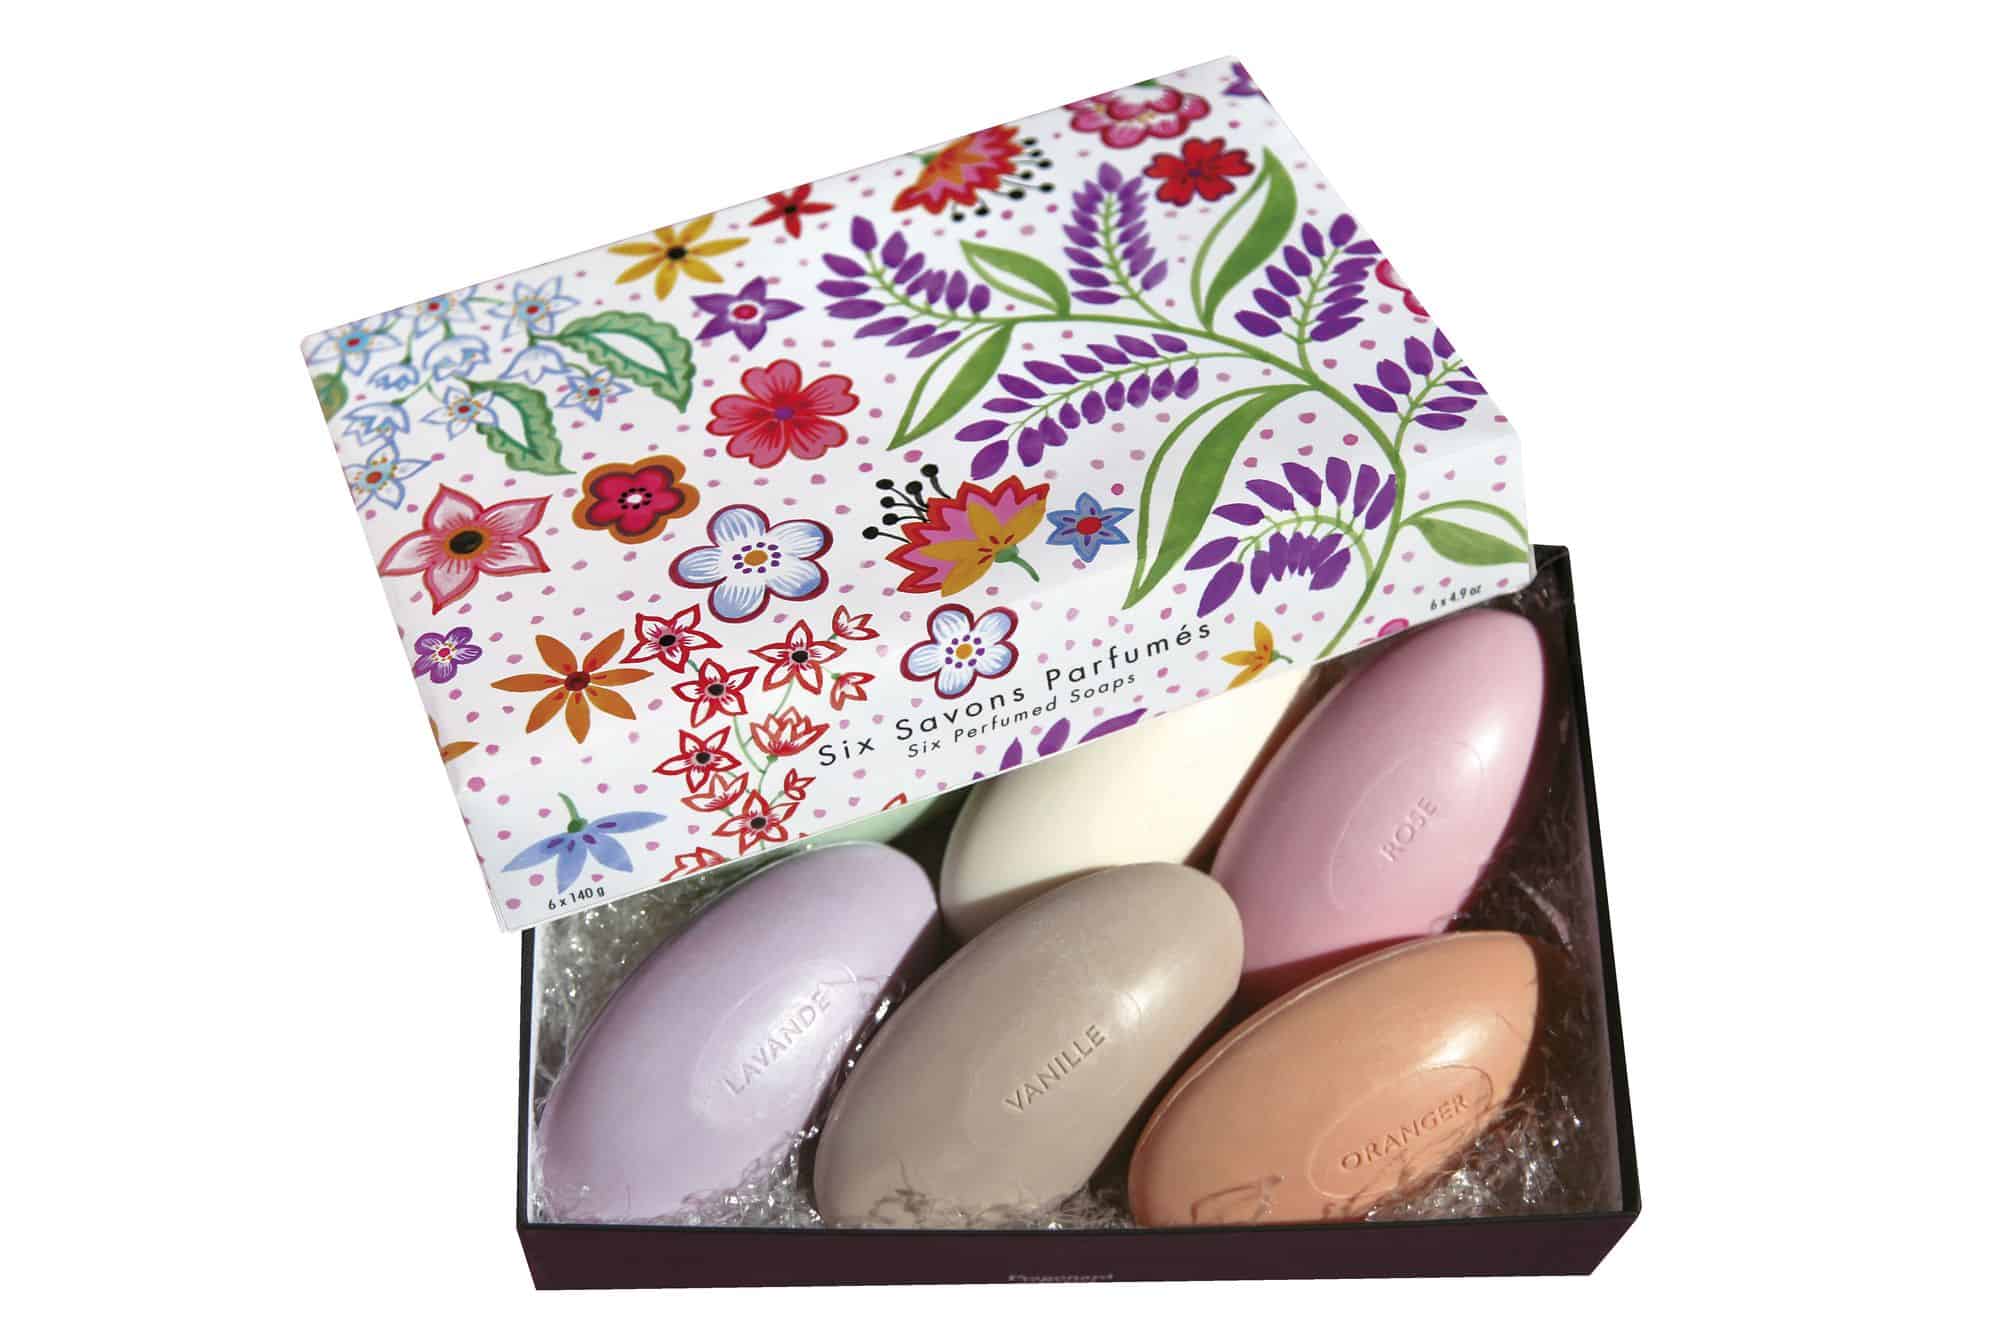 A beautiful box with flowers printed on the lid is open to show colorful-- purple, yellow, brown, pink and orange-- Fragonard soaps.